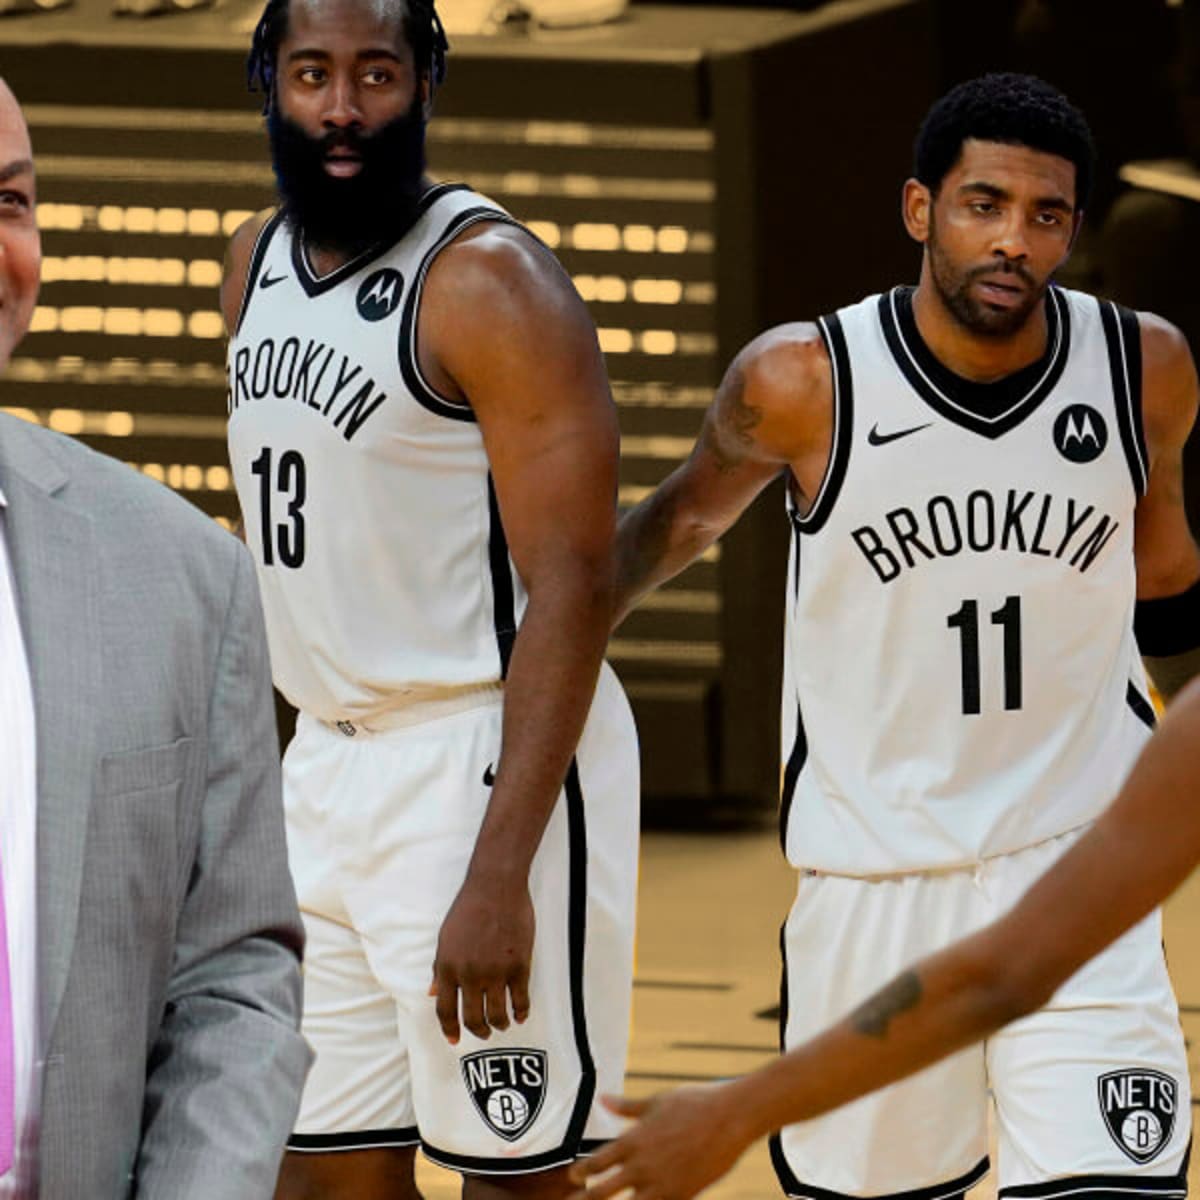 Brooklyn Nets: It's now or never to create the superteam